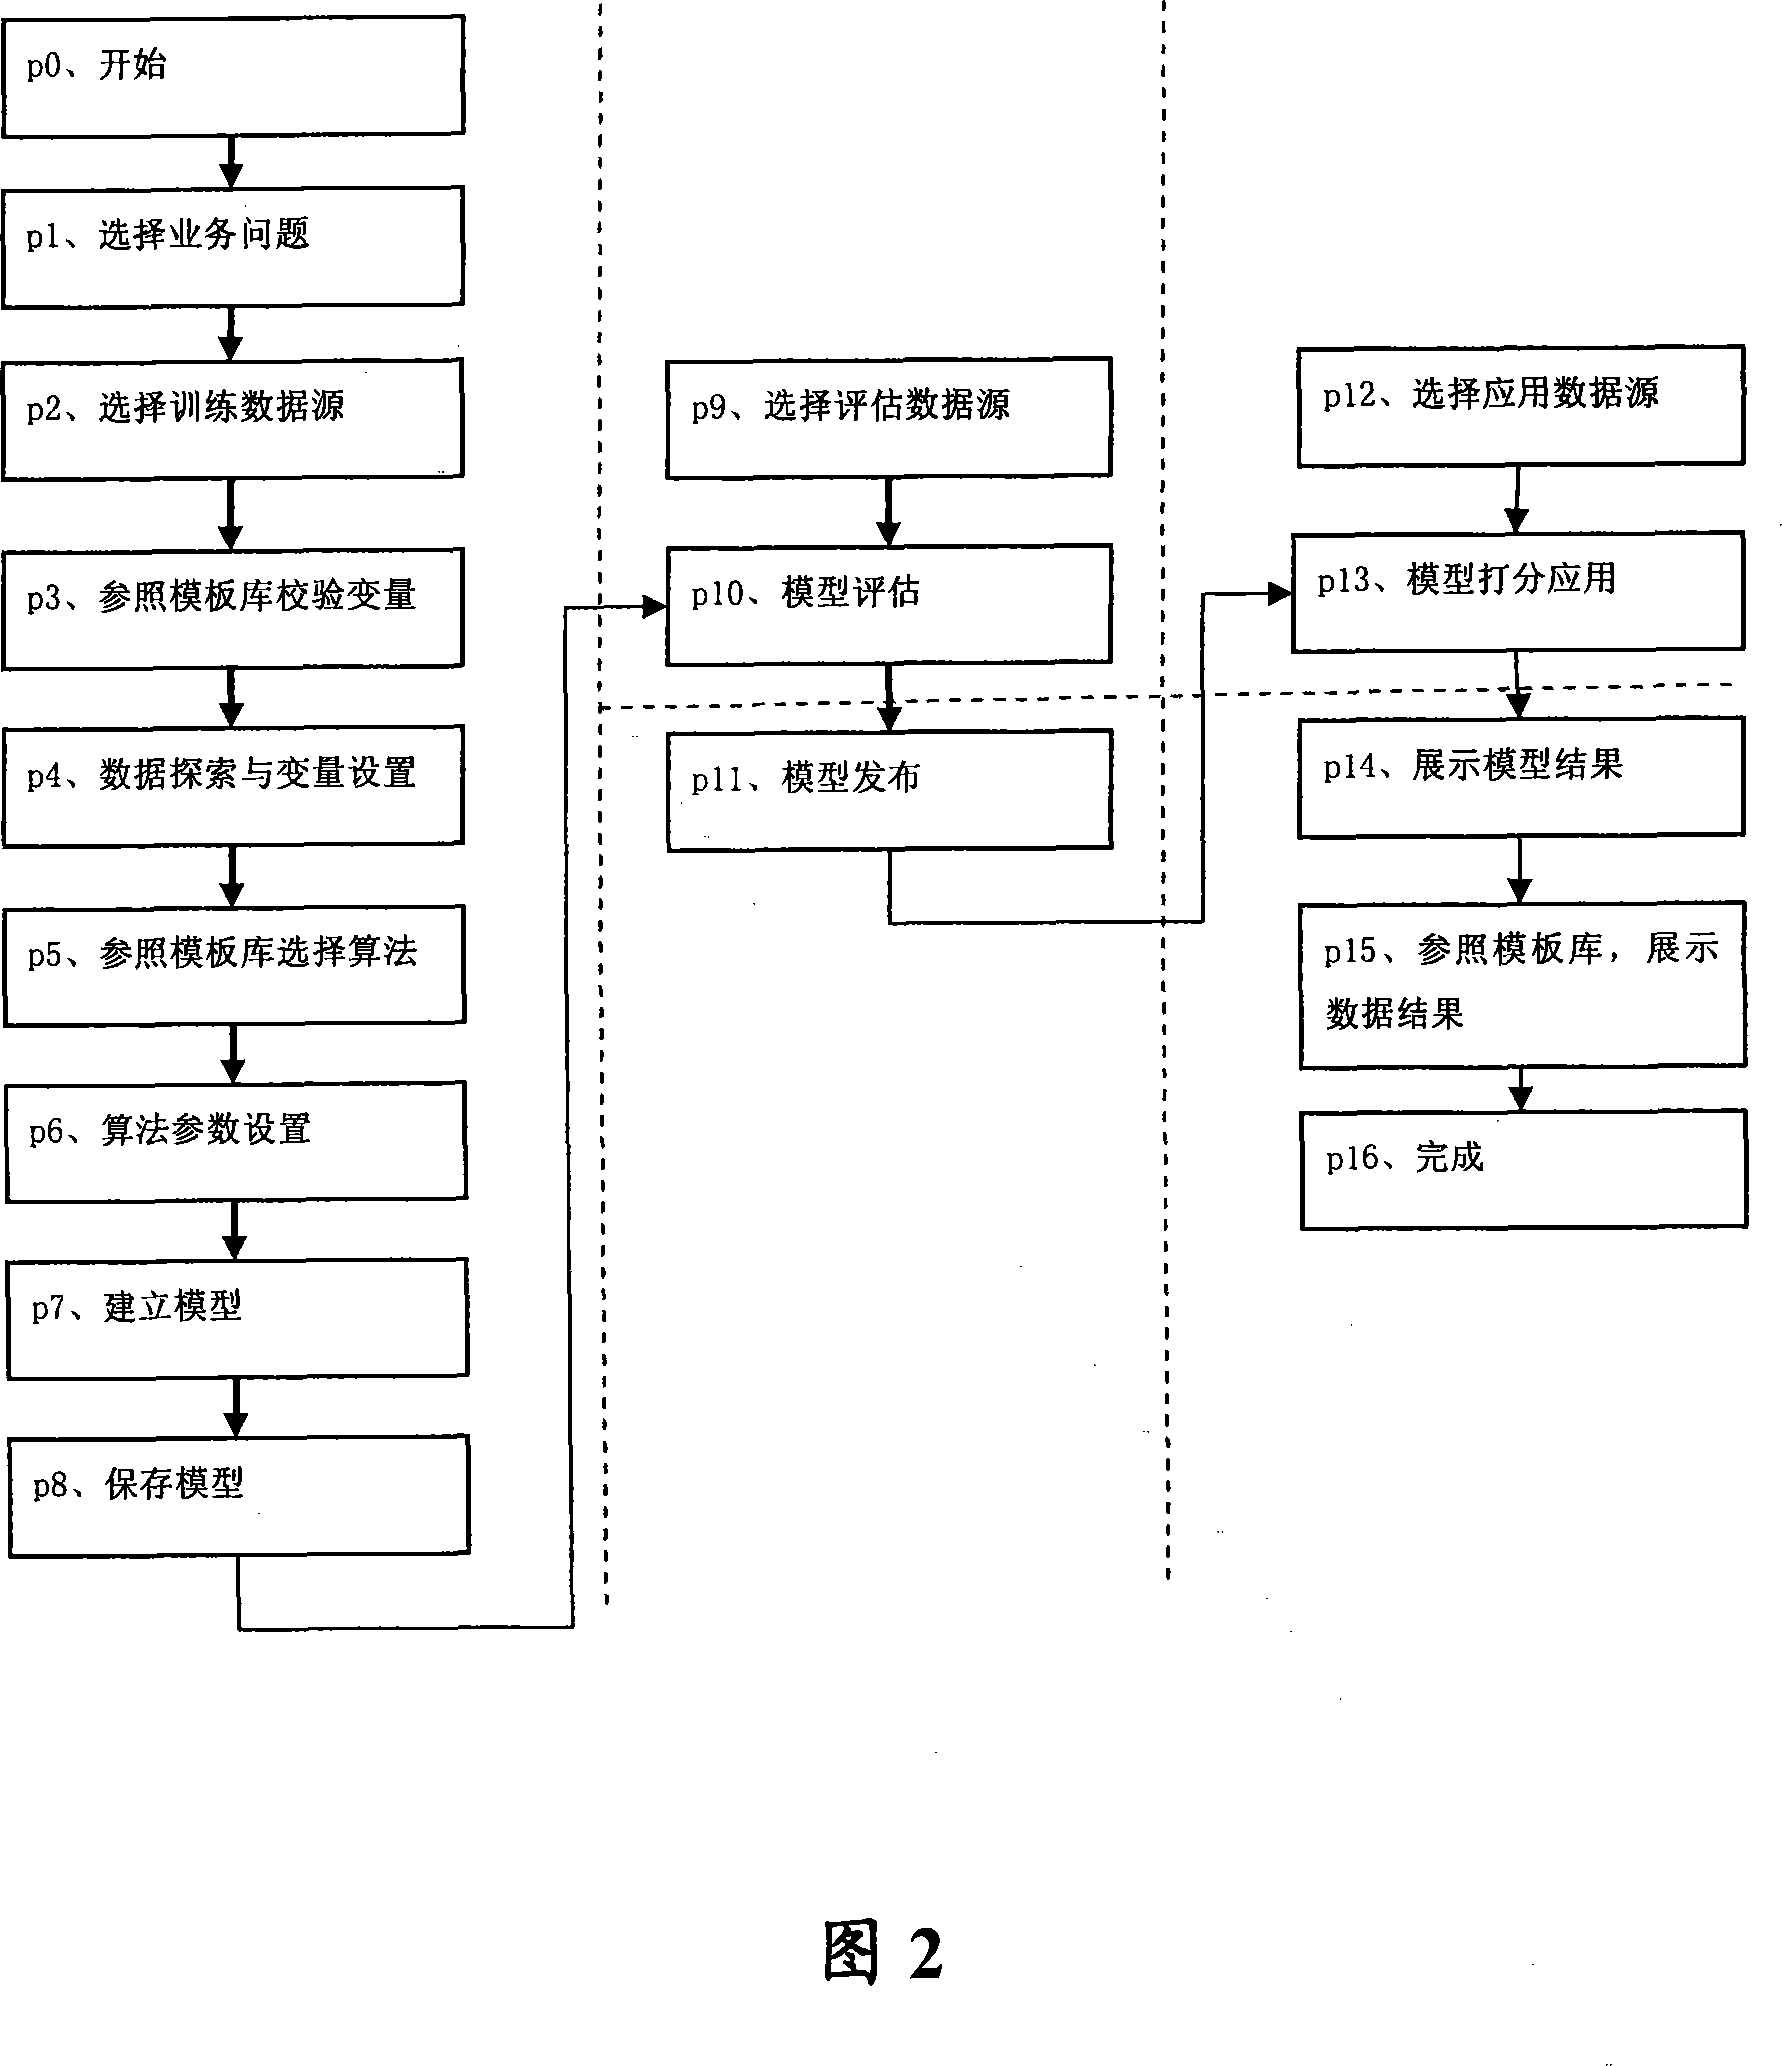 Data excavation system and method